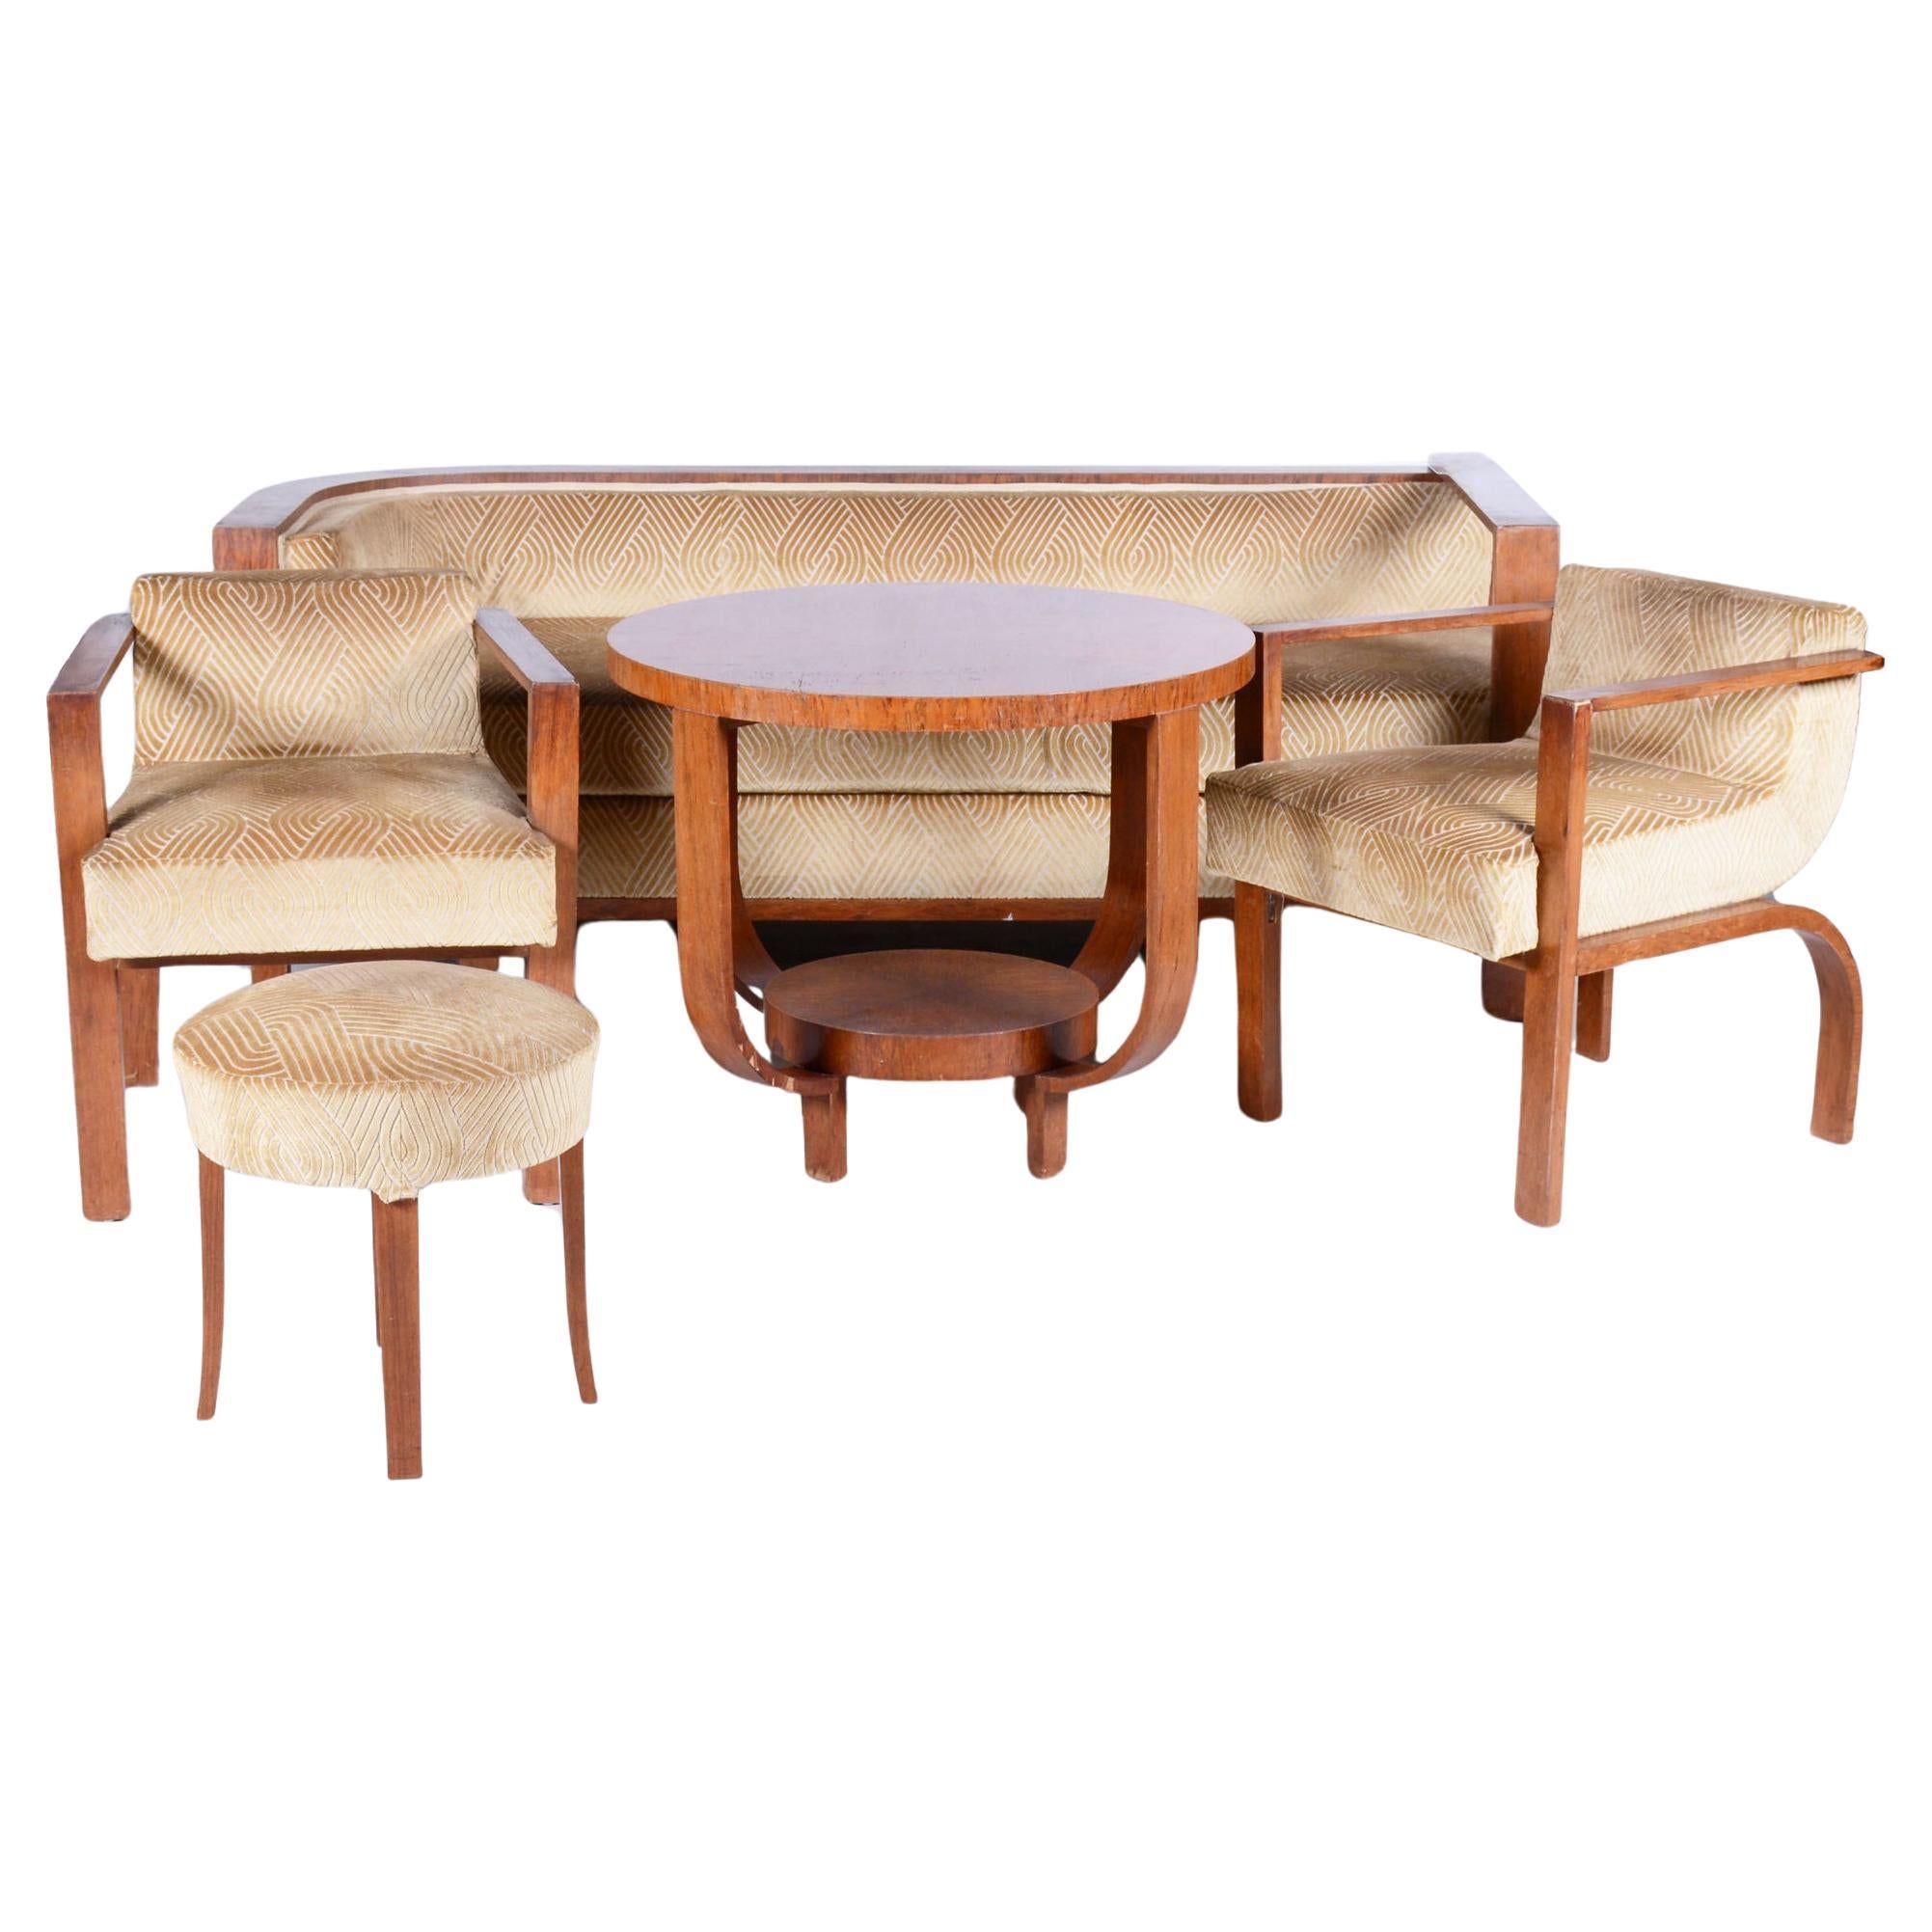 Palisander Seating Set with Coffee Table, Art Deco, Restored, France, 1920s For Sale